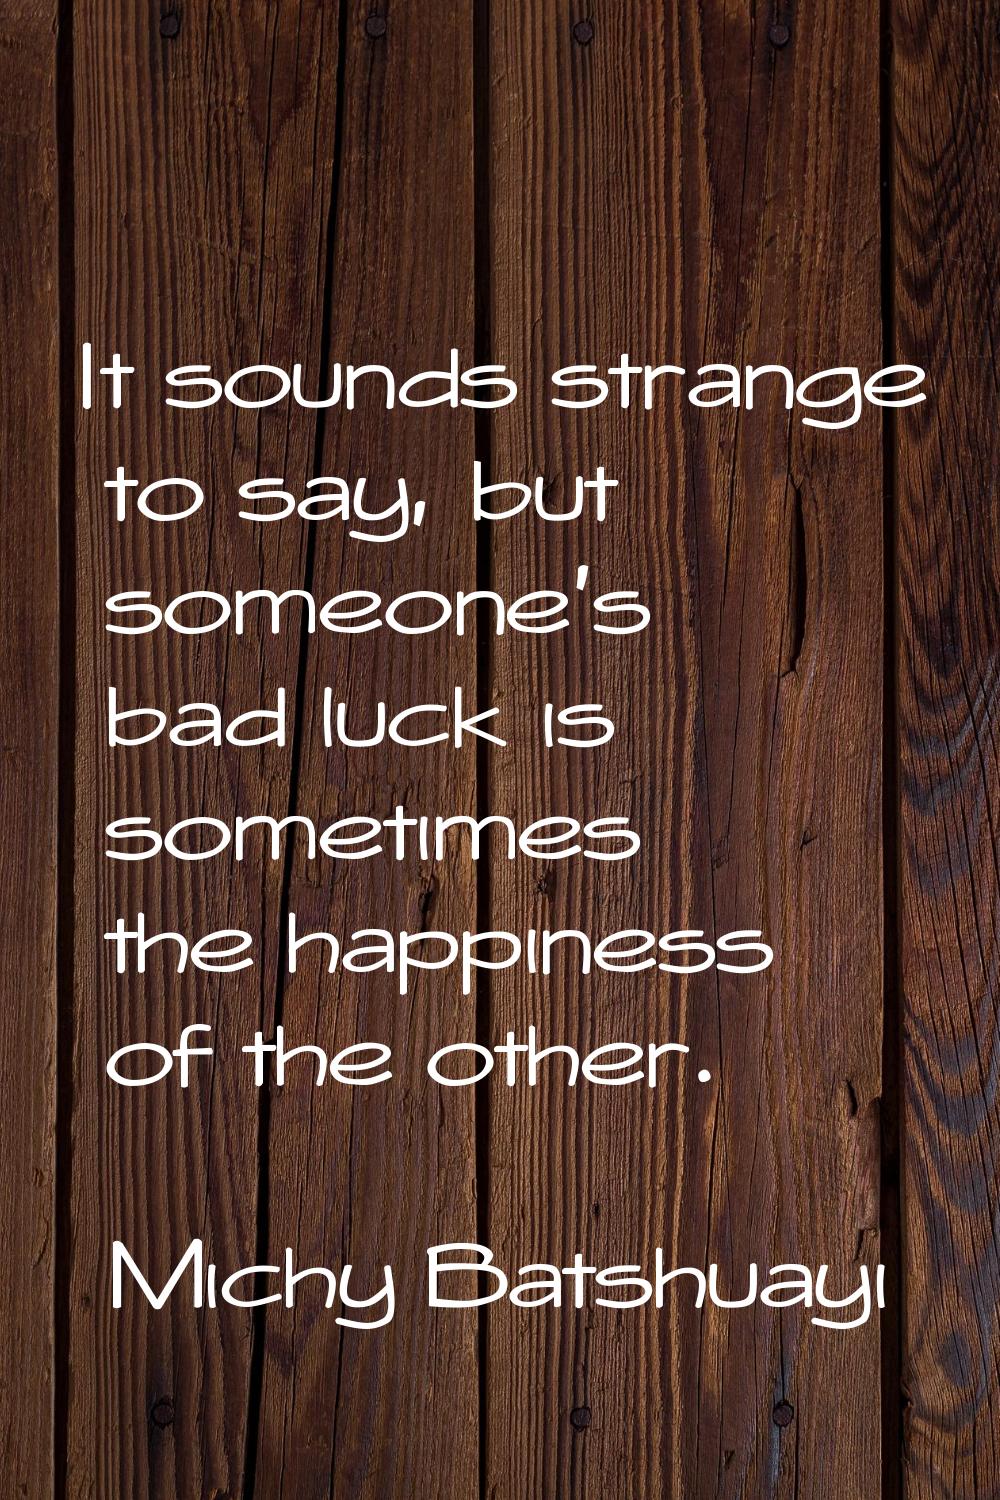 It sounds strange to say, but someone's bad luck is sometimes the happiness of the other.